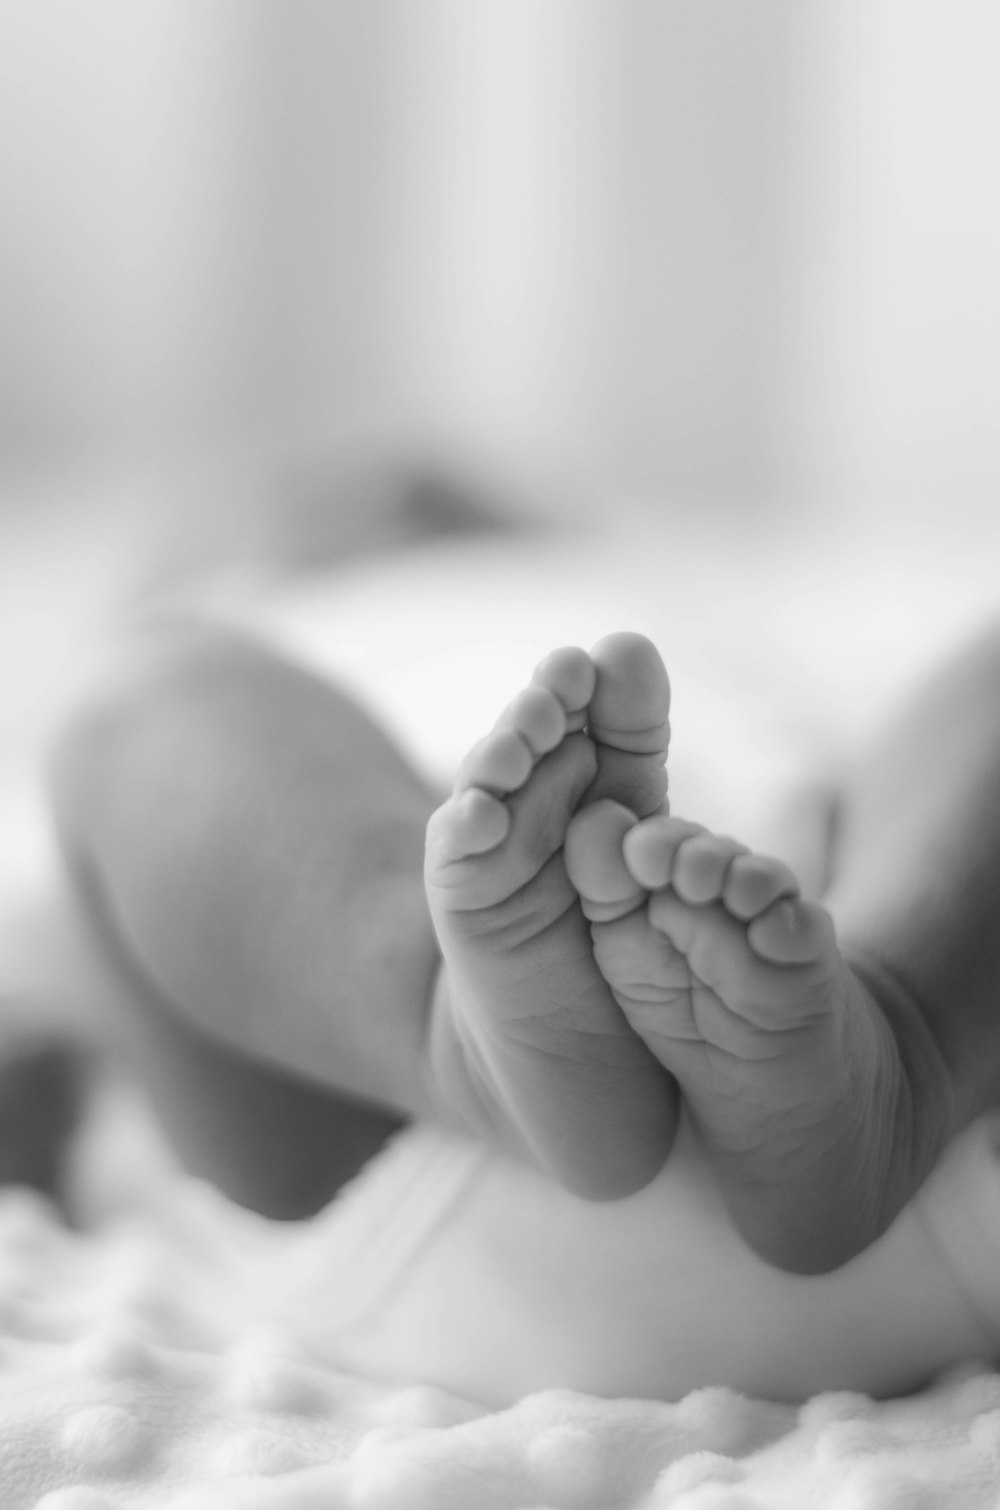 500+ Baby Feet Pictures  Download Free Images on Unsplash